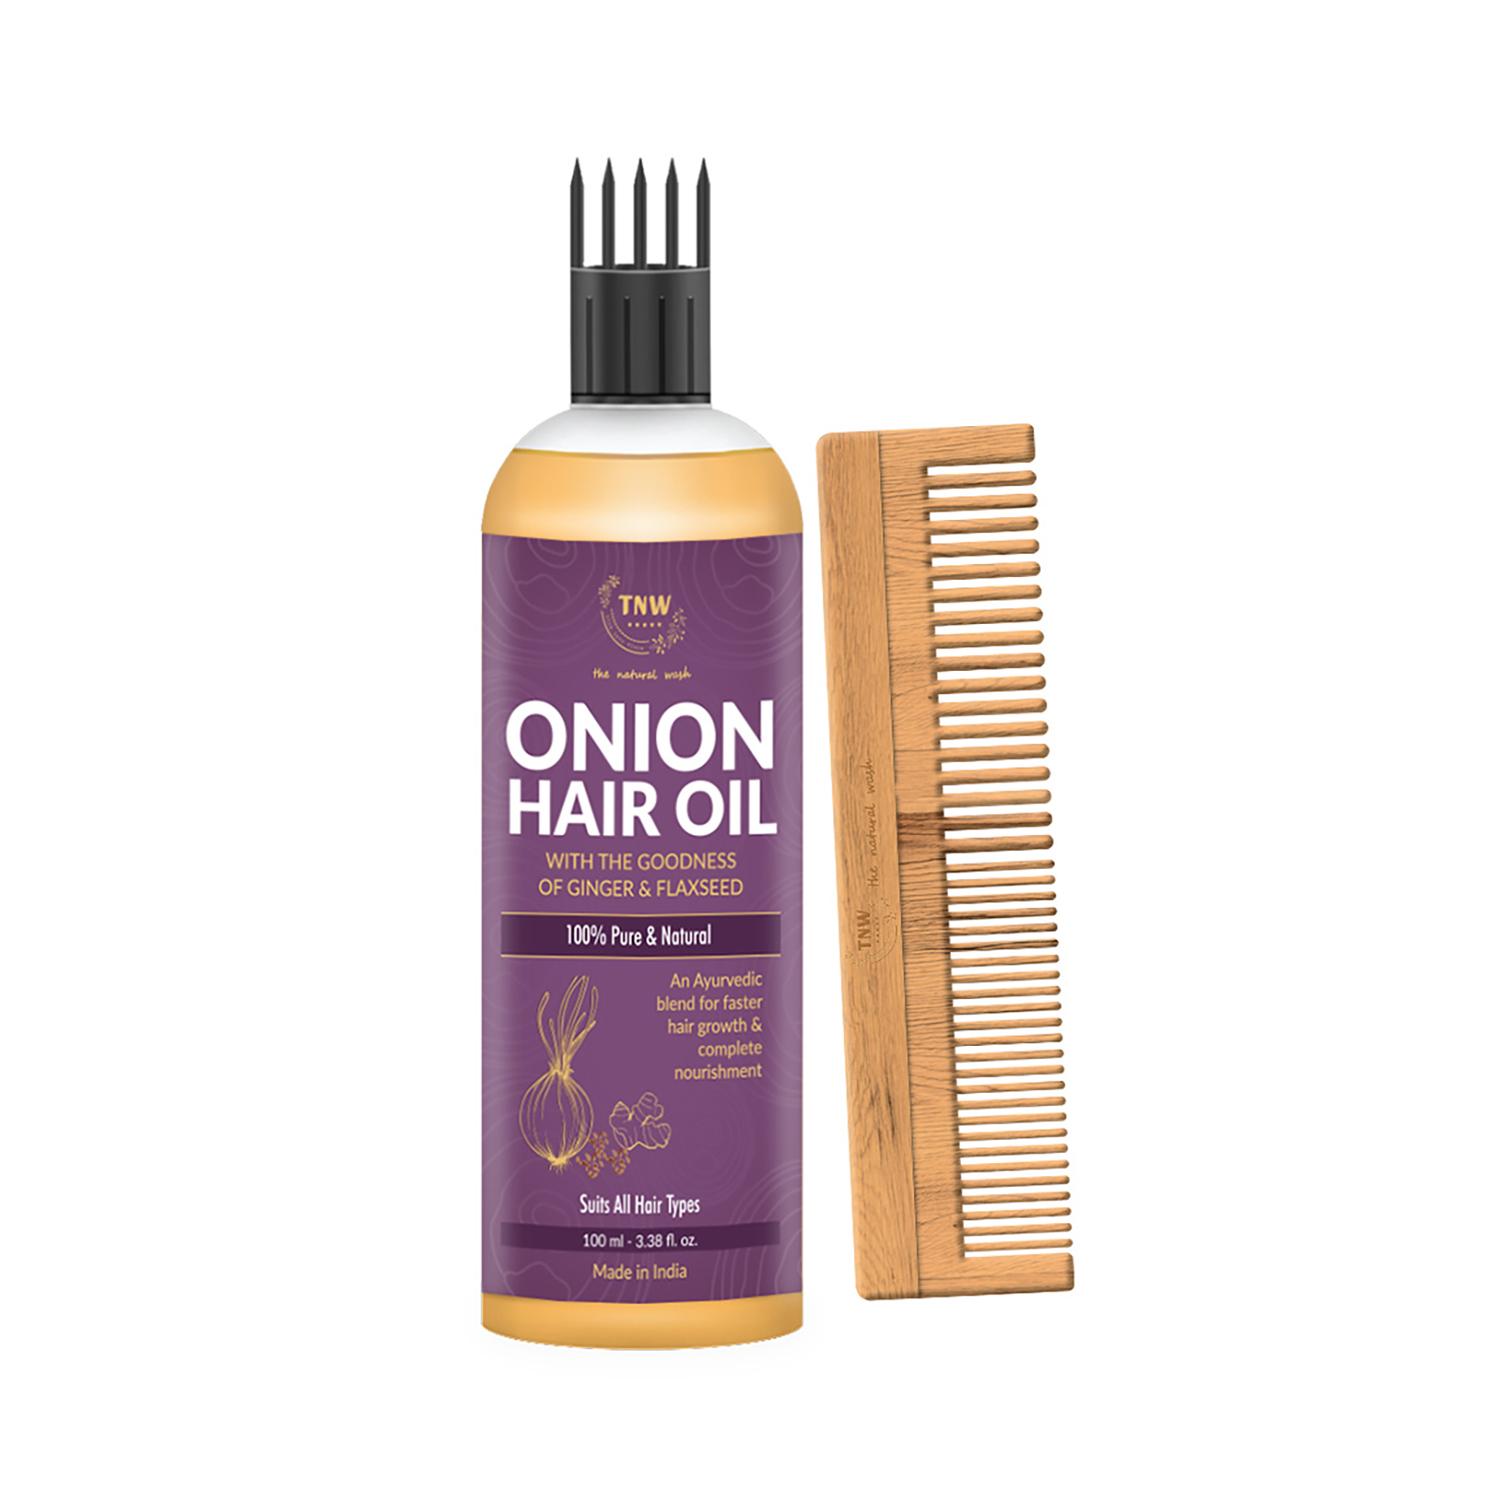 TNW - The Natural Wash Onion Hair Oil and Neem Wood Combo